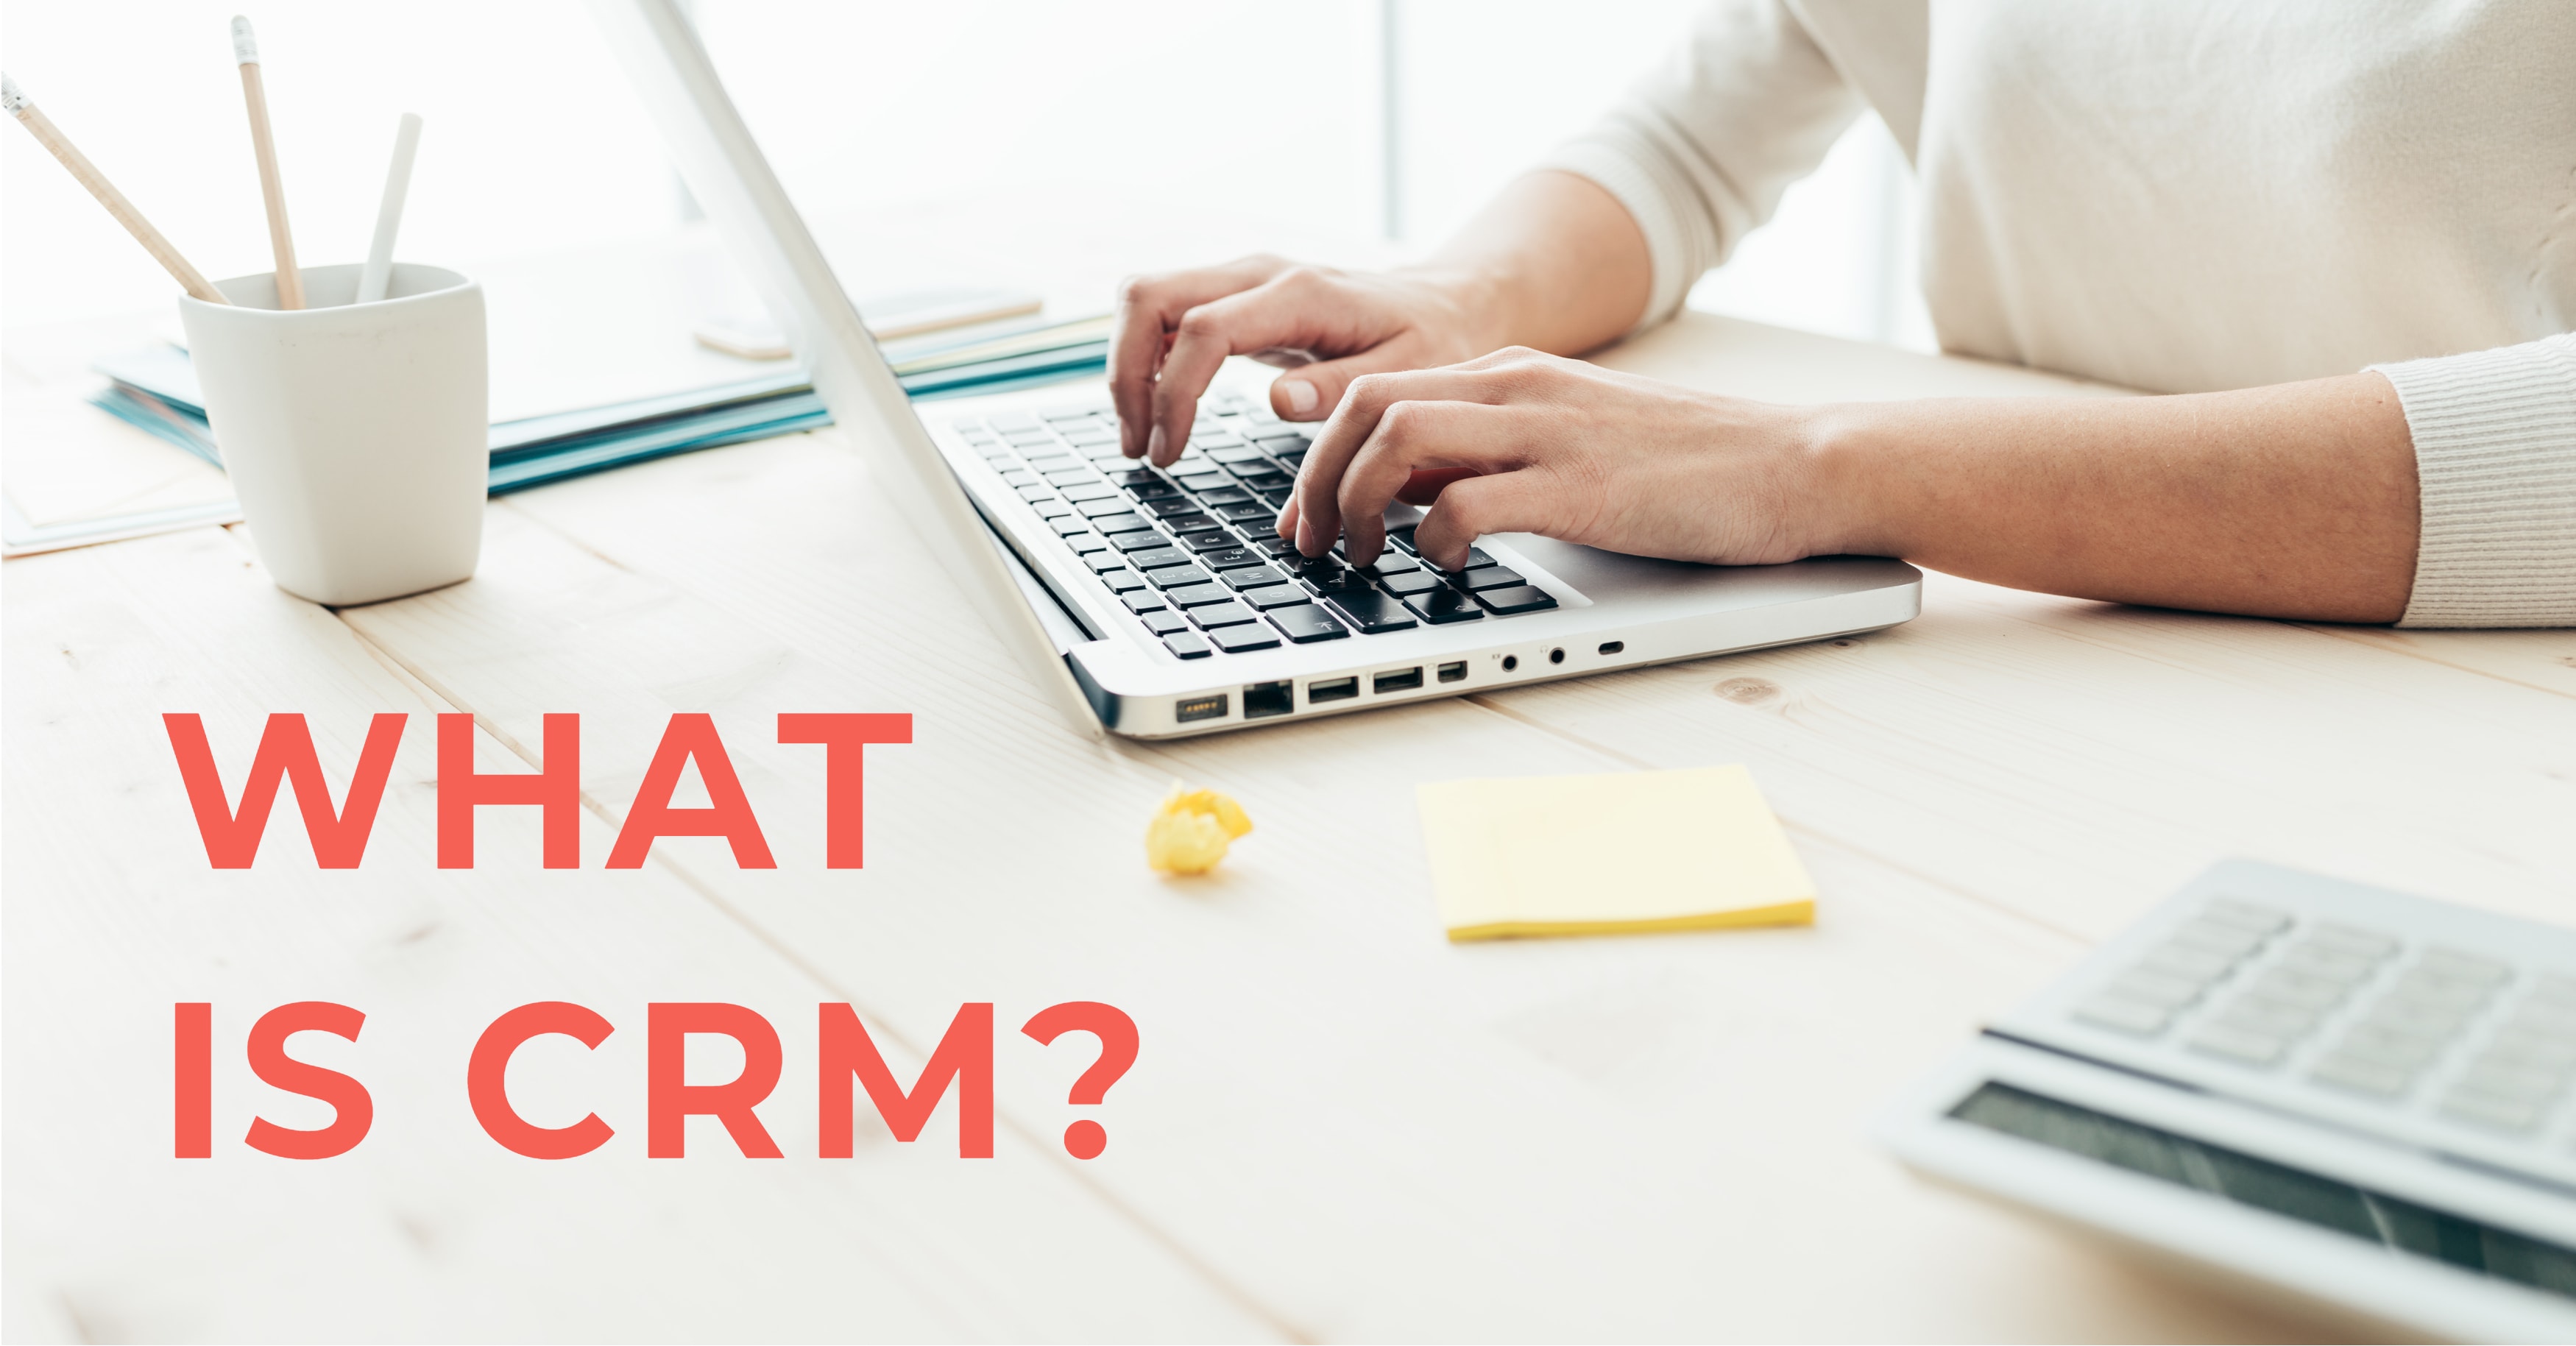 What is CRM, and Why Do You Need It?